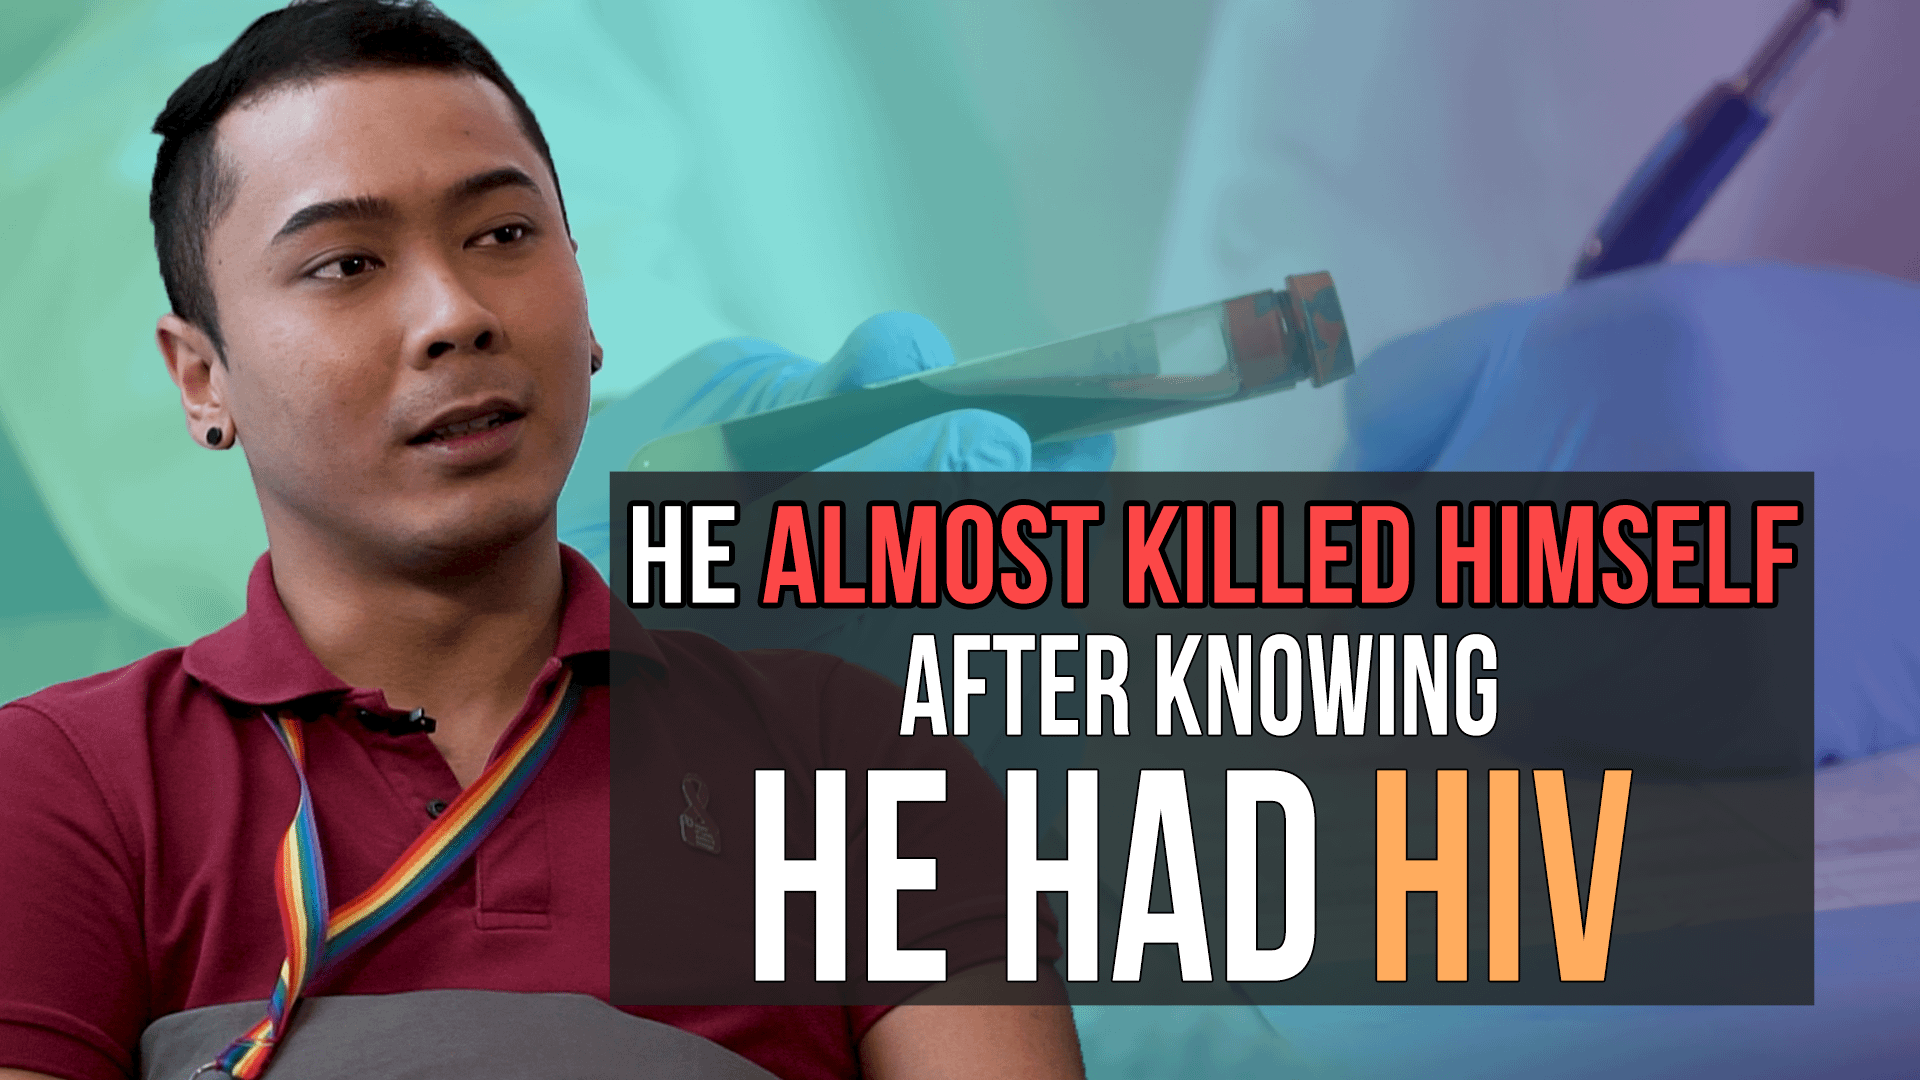 He almost killed himself after knowing he had HIV